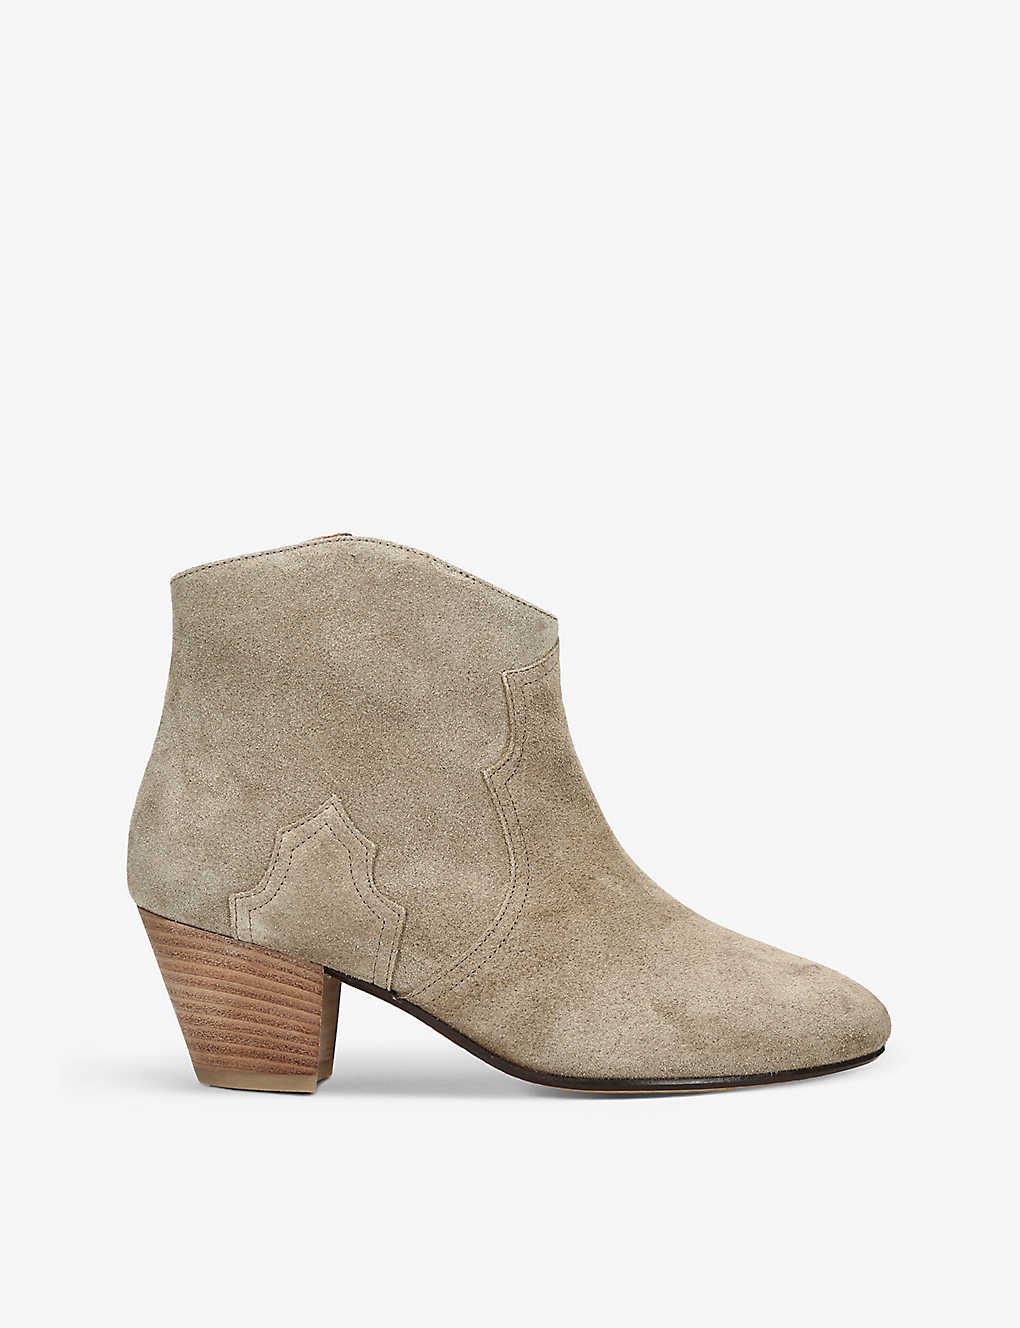 ISABEL MARANT ISABEL MARANT WOMEN'S TAUPE DICKER CONTRAST-SOLE SUEDE HEELED ANKLE BOOTS,62607224